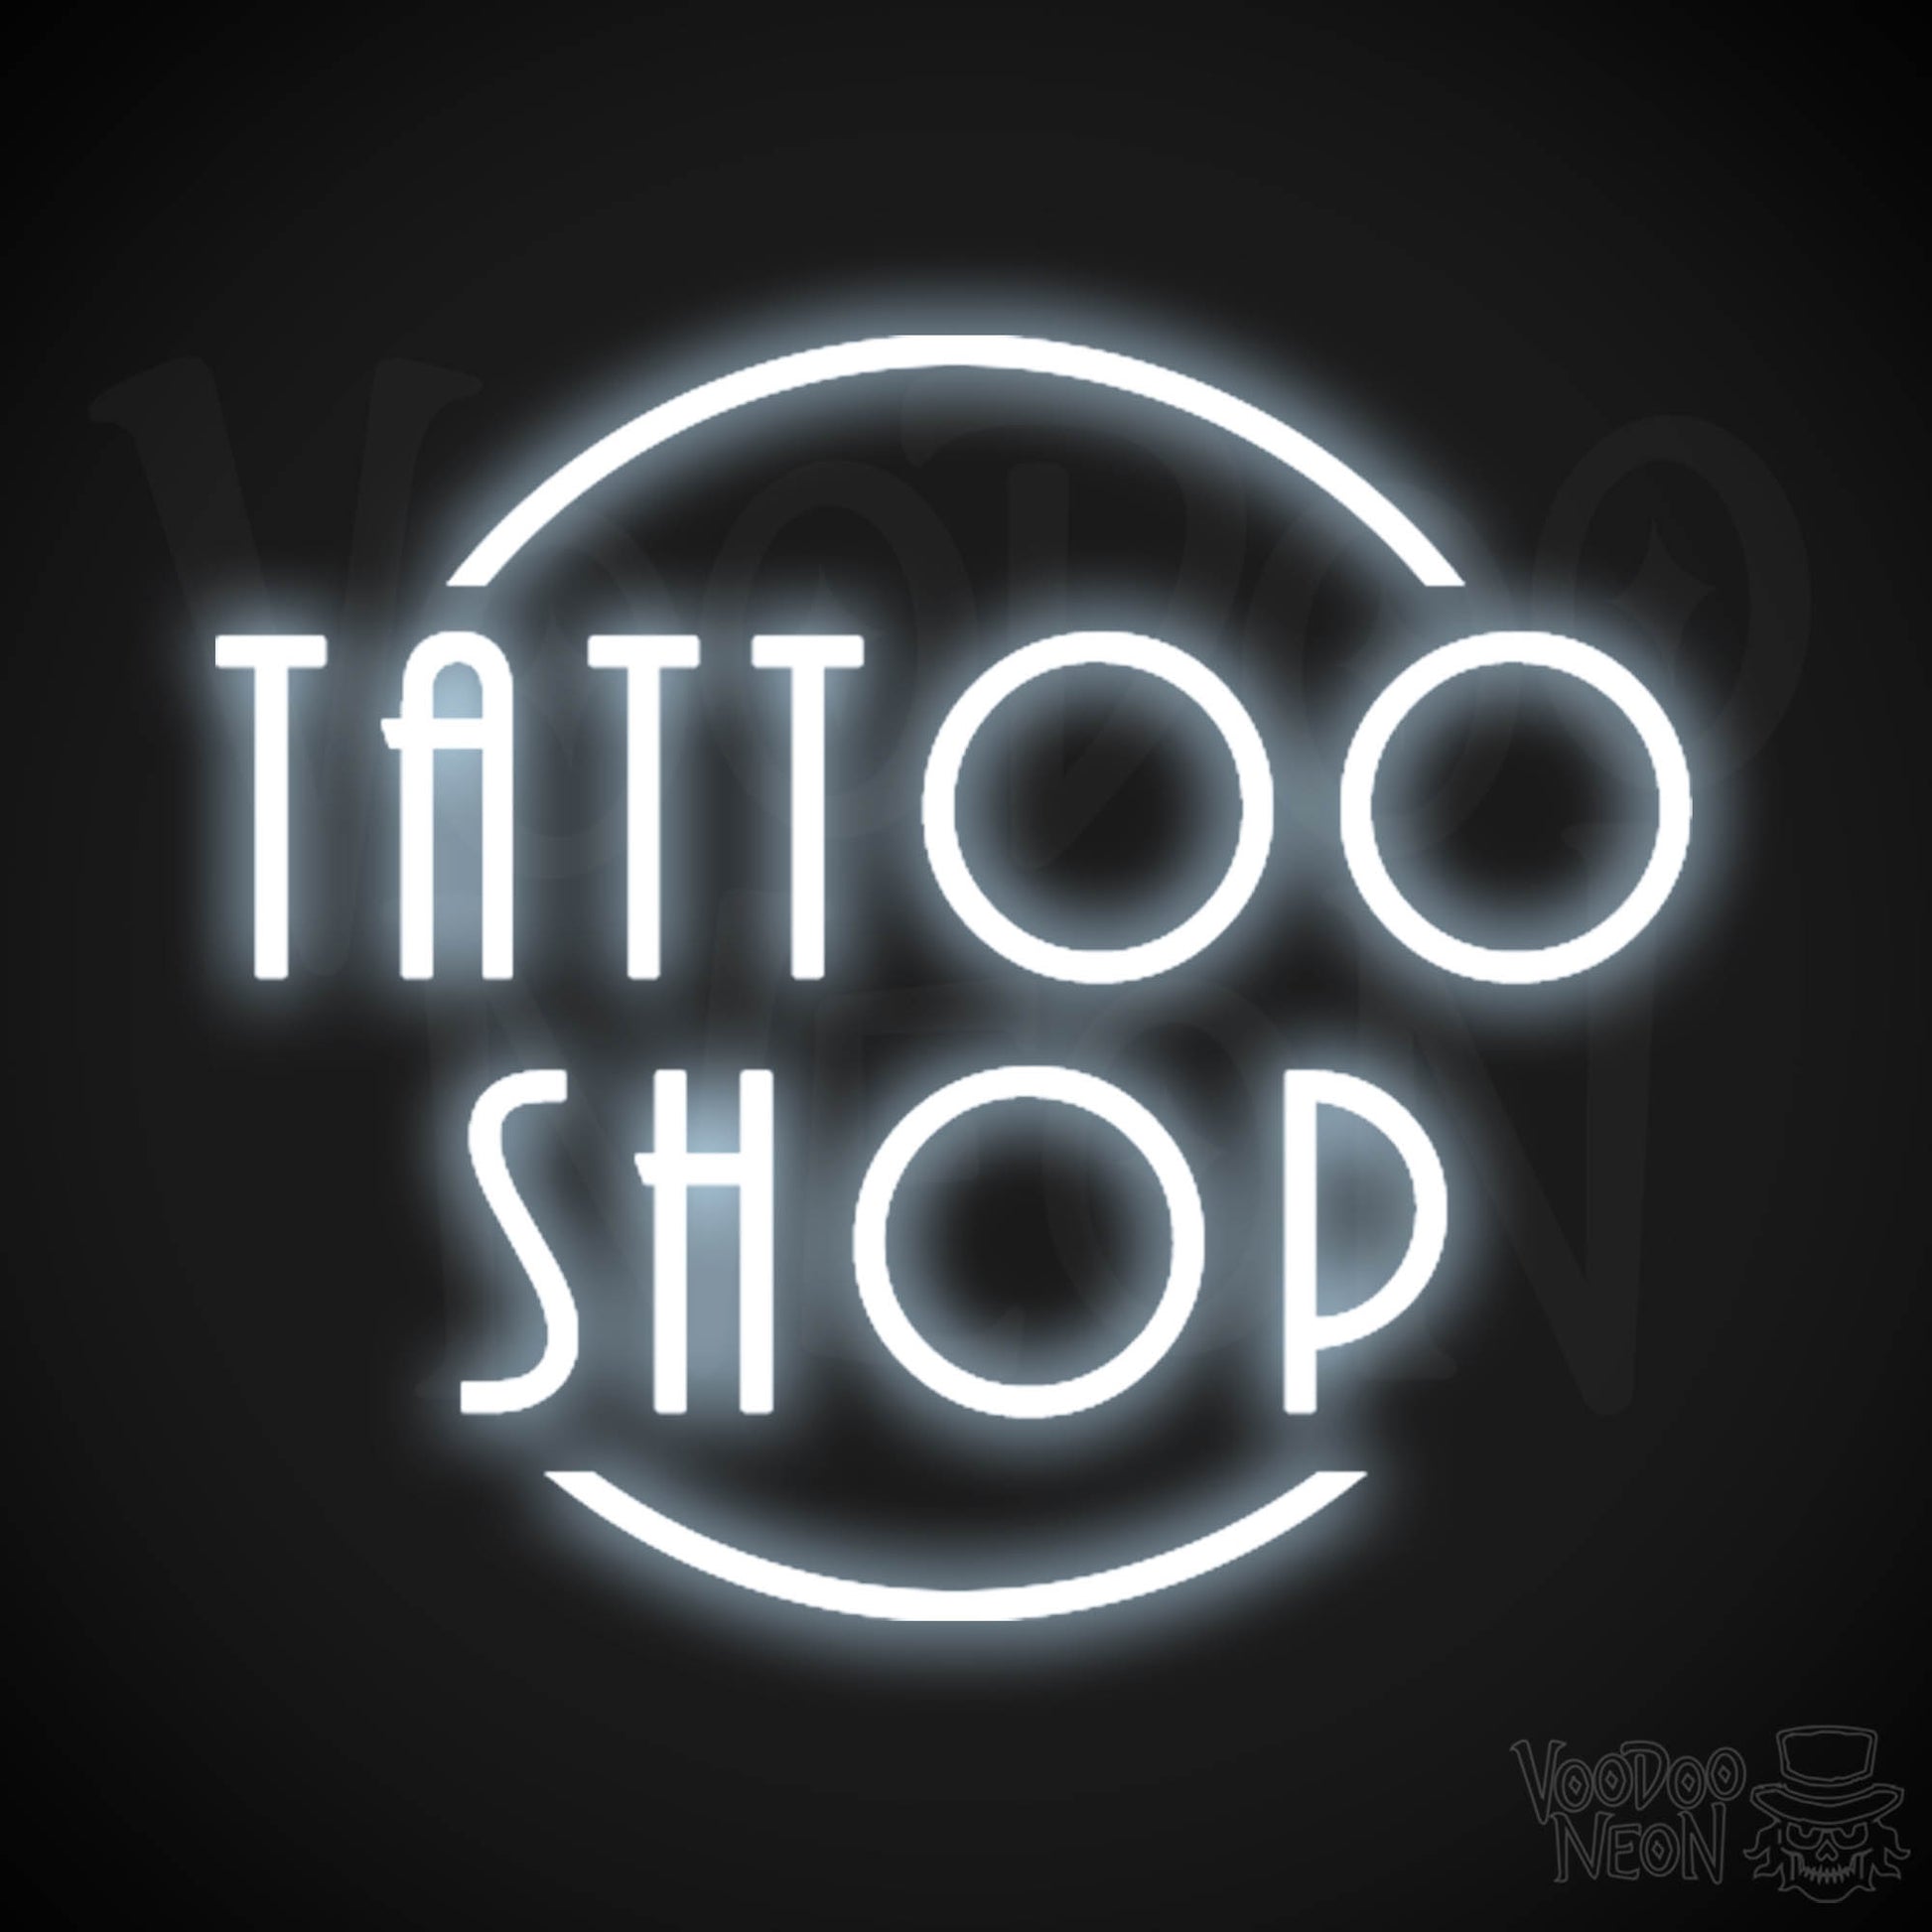 Tattoo Shop Neon Sign - Neon Tattoo Shop Sign - Tattoo Sign - Color Cool White